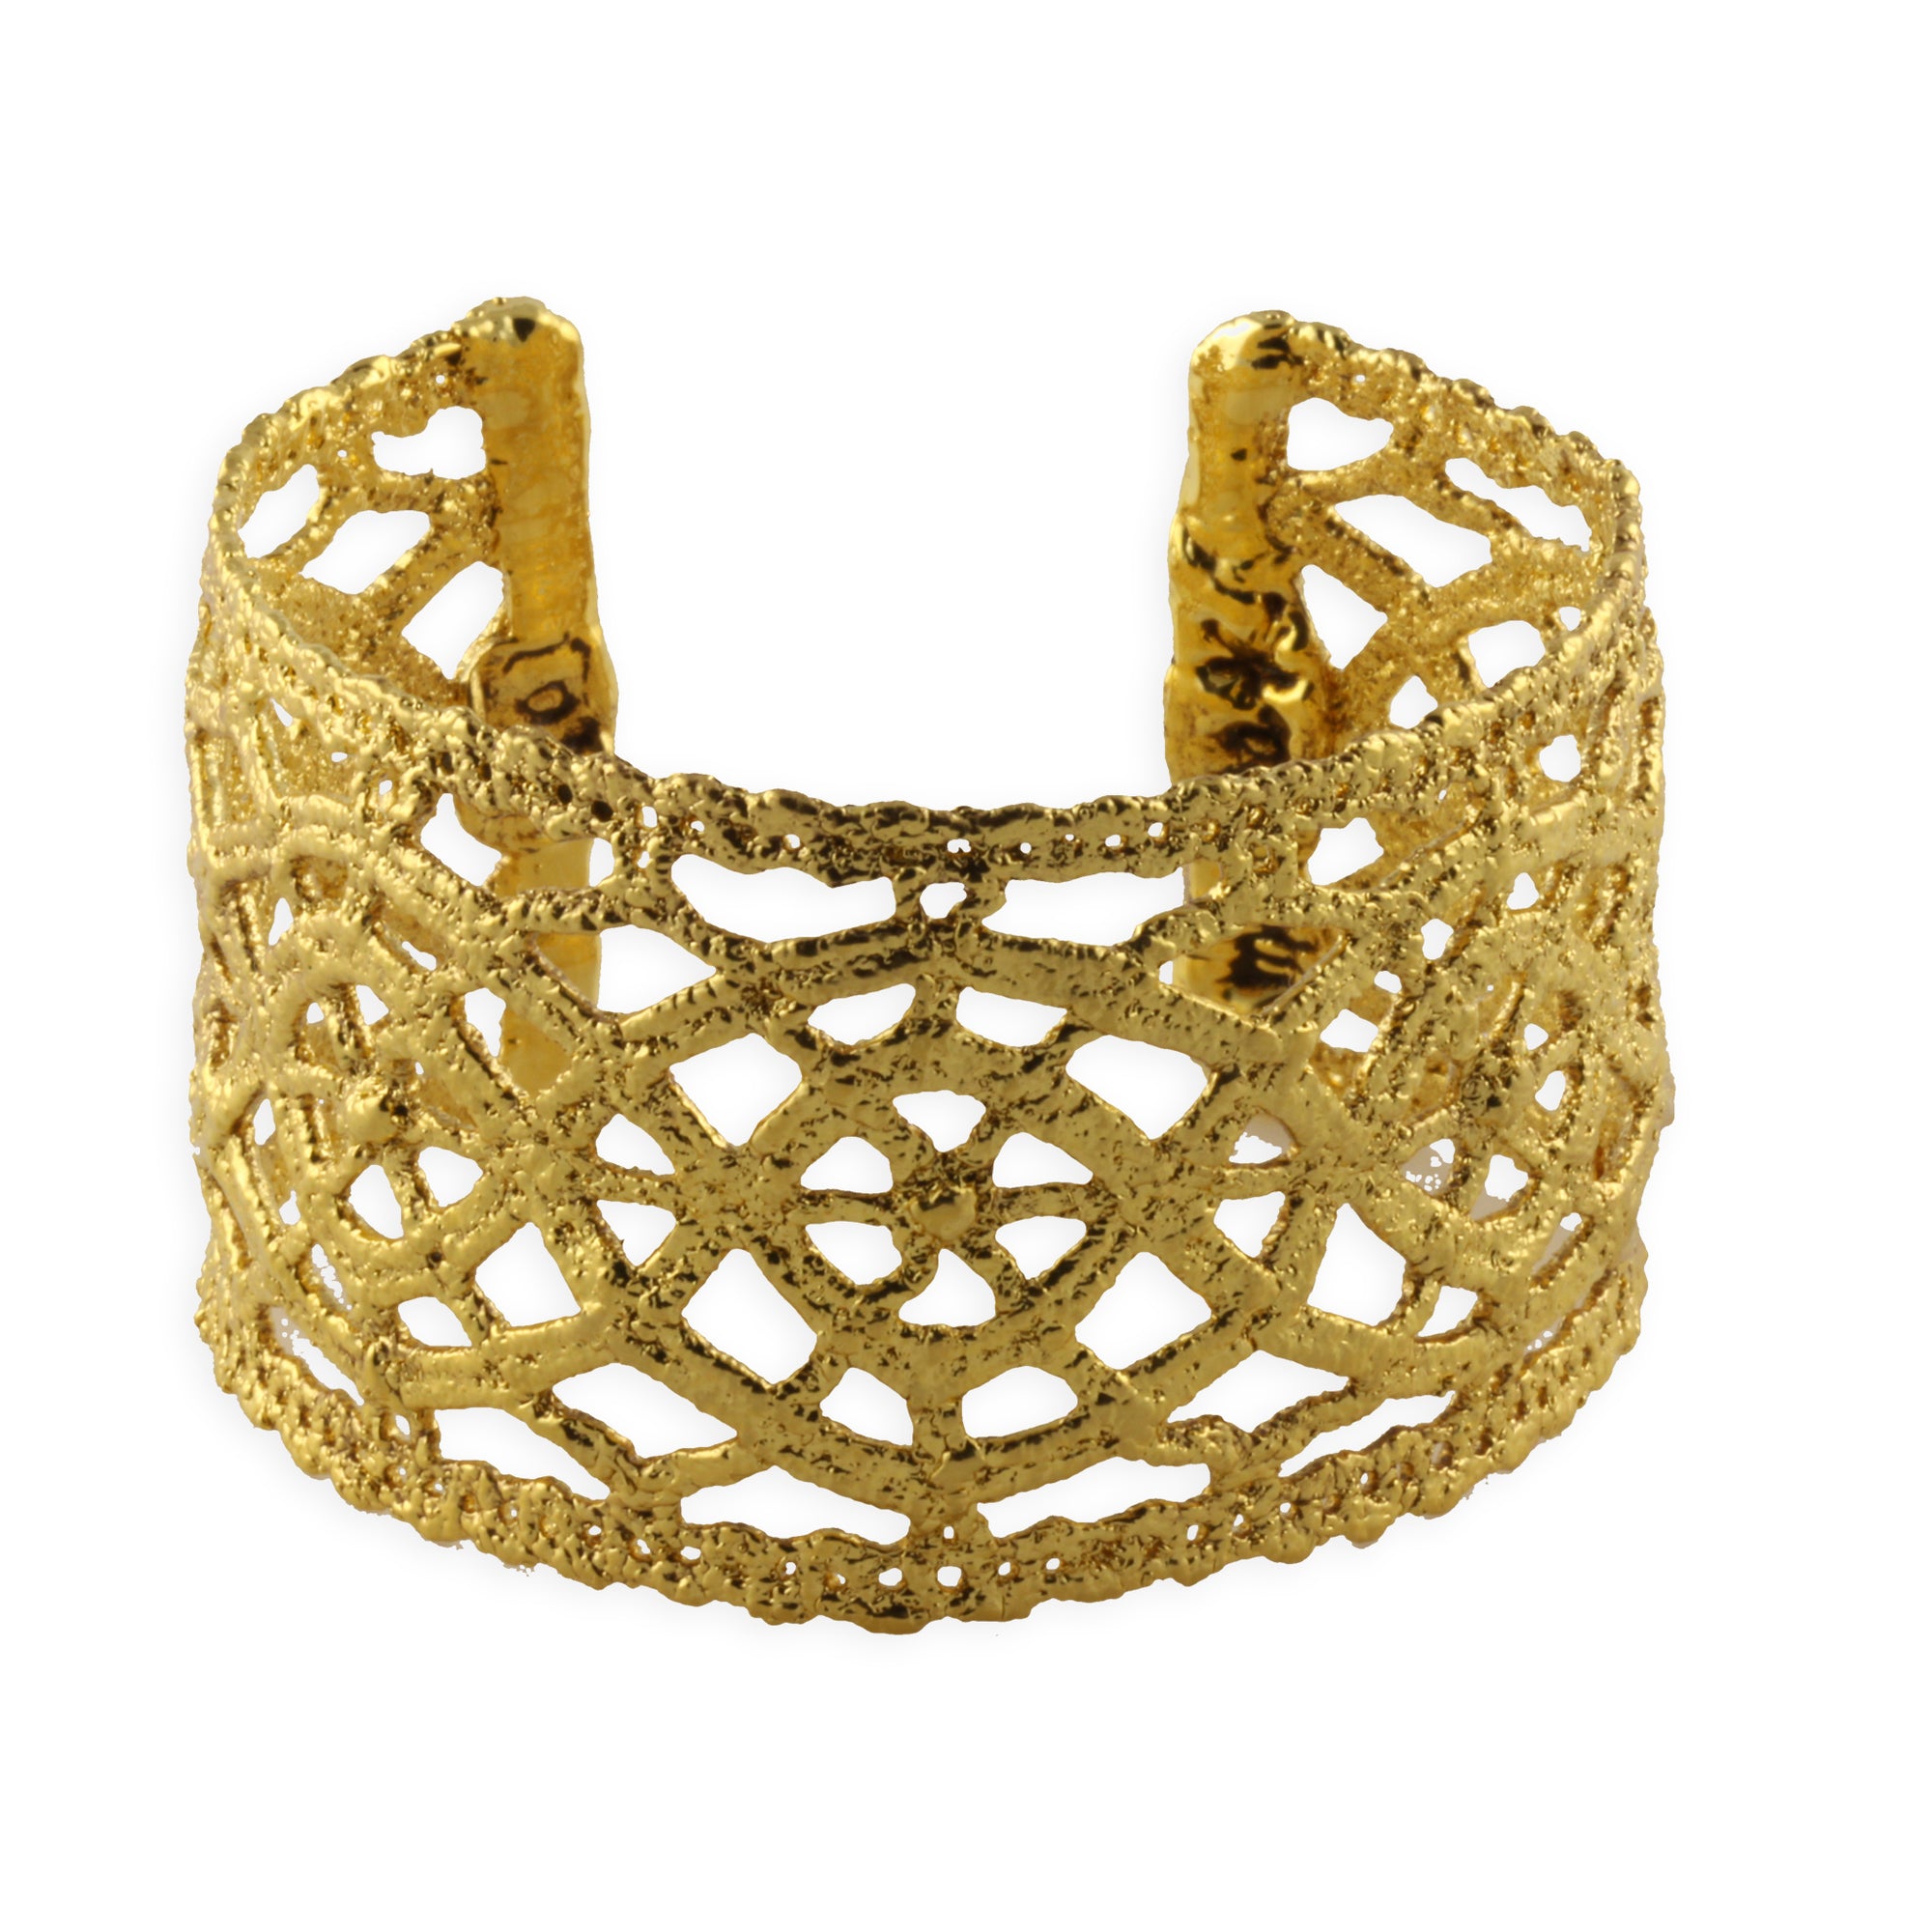 Classic Cuff bracelet made from Antique lace dipped in 24k gold.